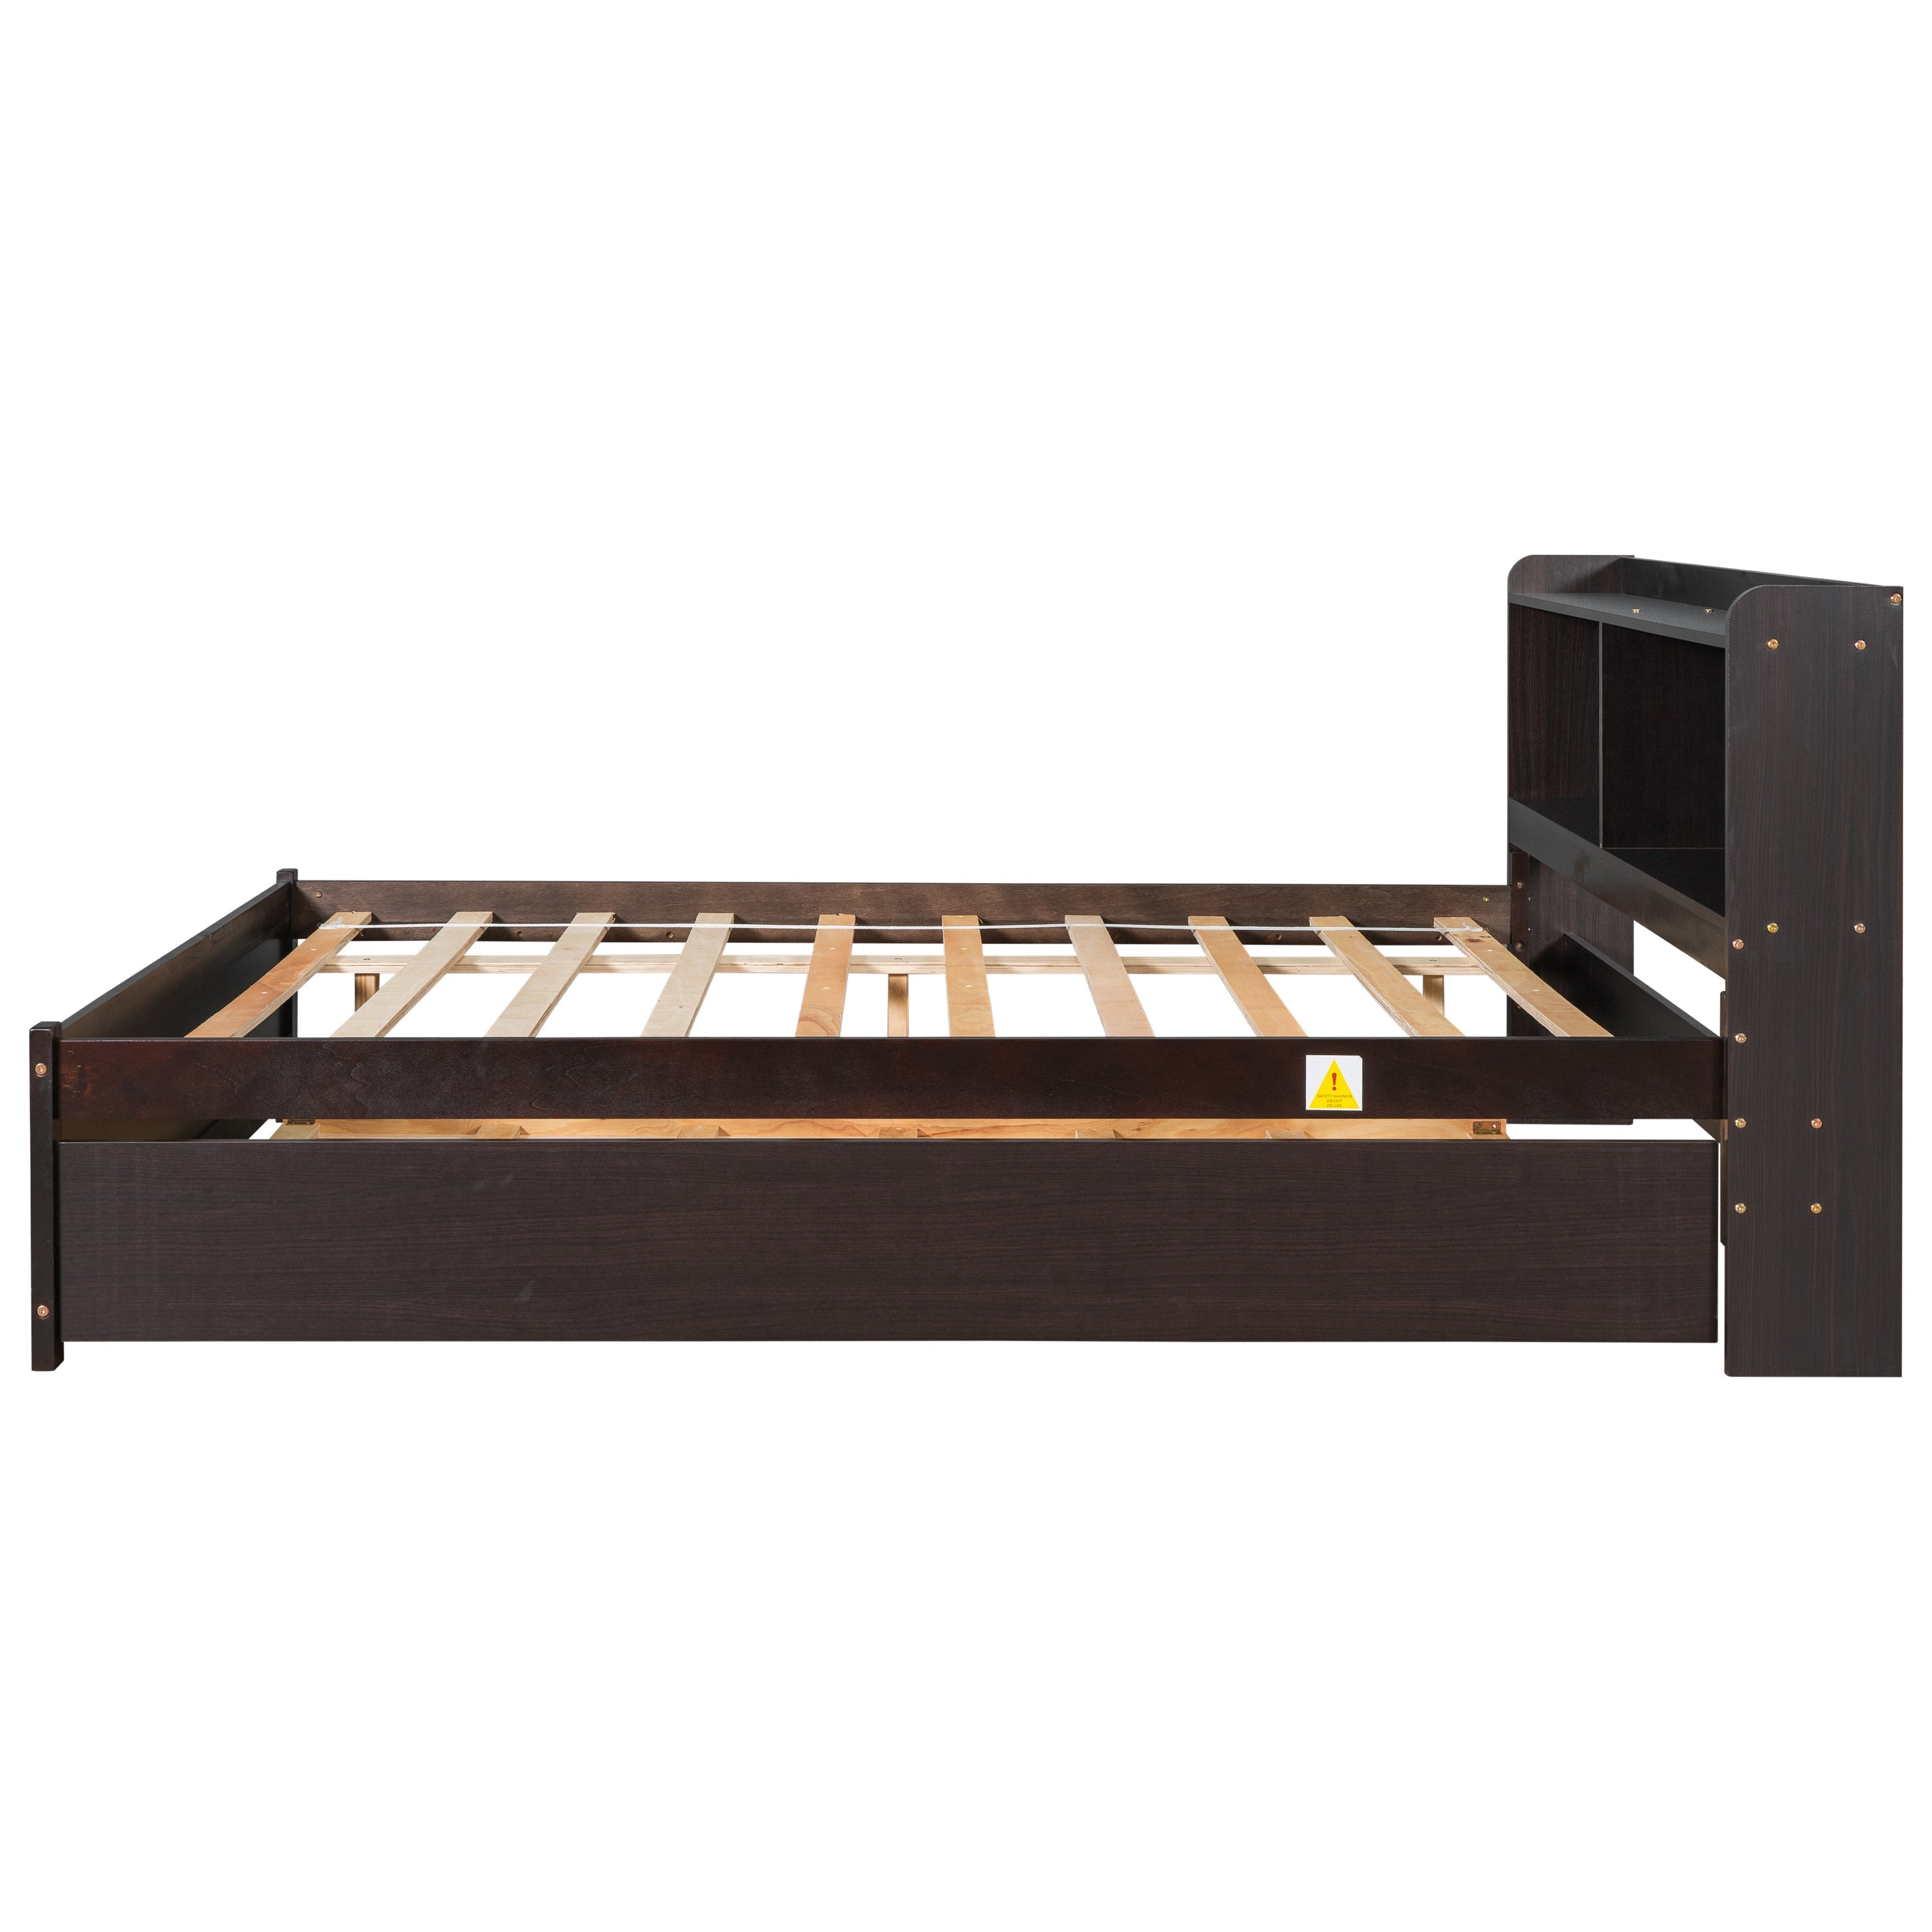 Full Bed Frame with Trundle Included, BTMWAY Wood Platform Bed with Storage Bookcase and Headboard, No Box Spring Needed, Full Size Bed Frame for Kids Boys Girls Teens, 85''x57.5''x36.7'', Espresso